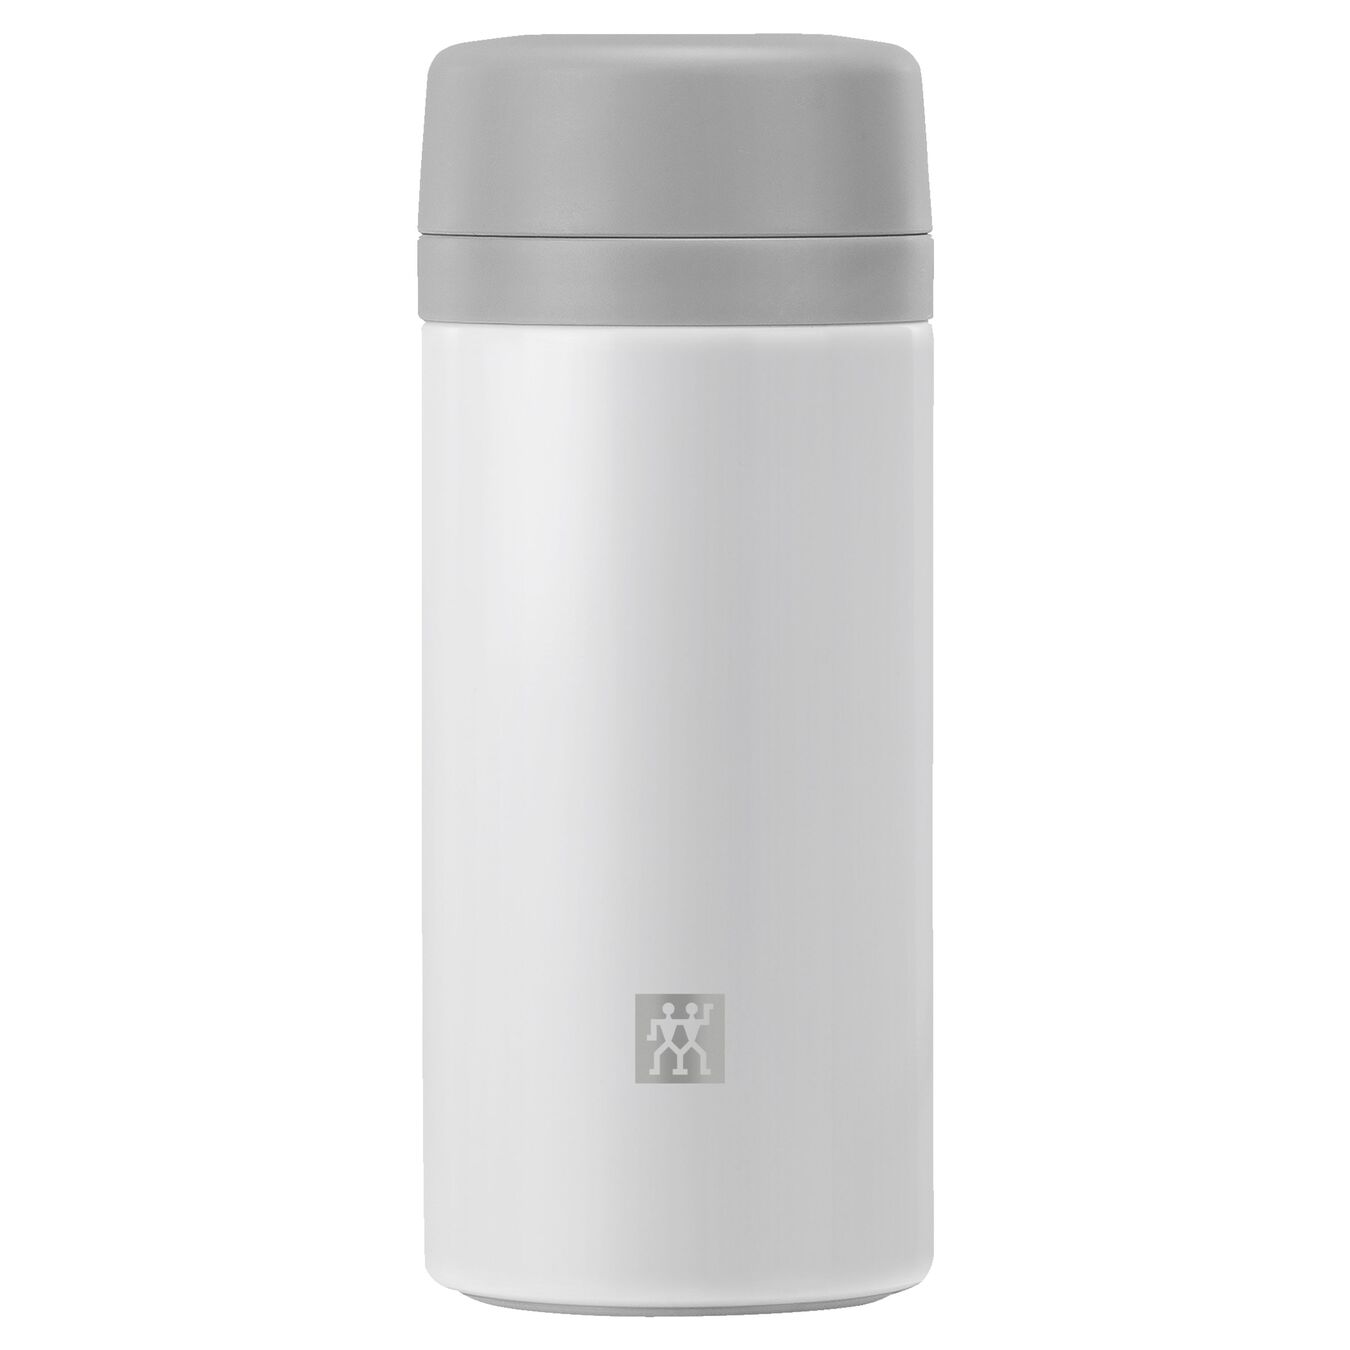 Thermo flask, 420 ml | stainless steel | white-grey,,large 1